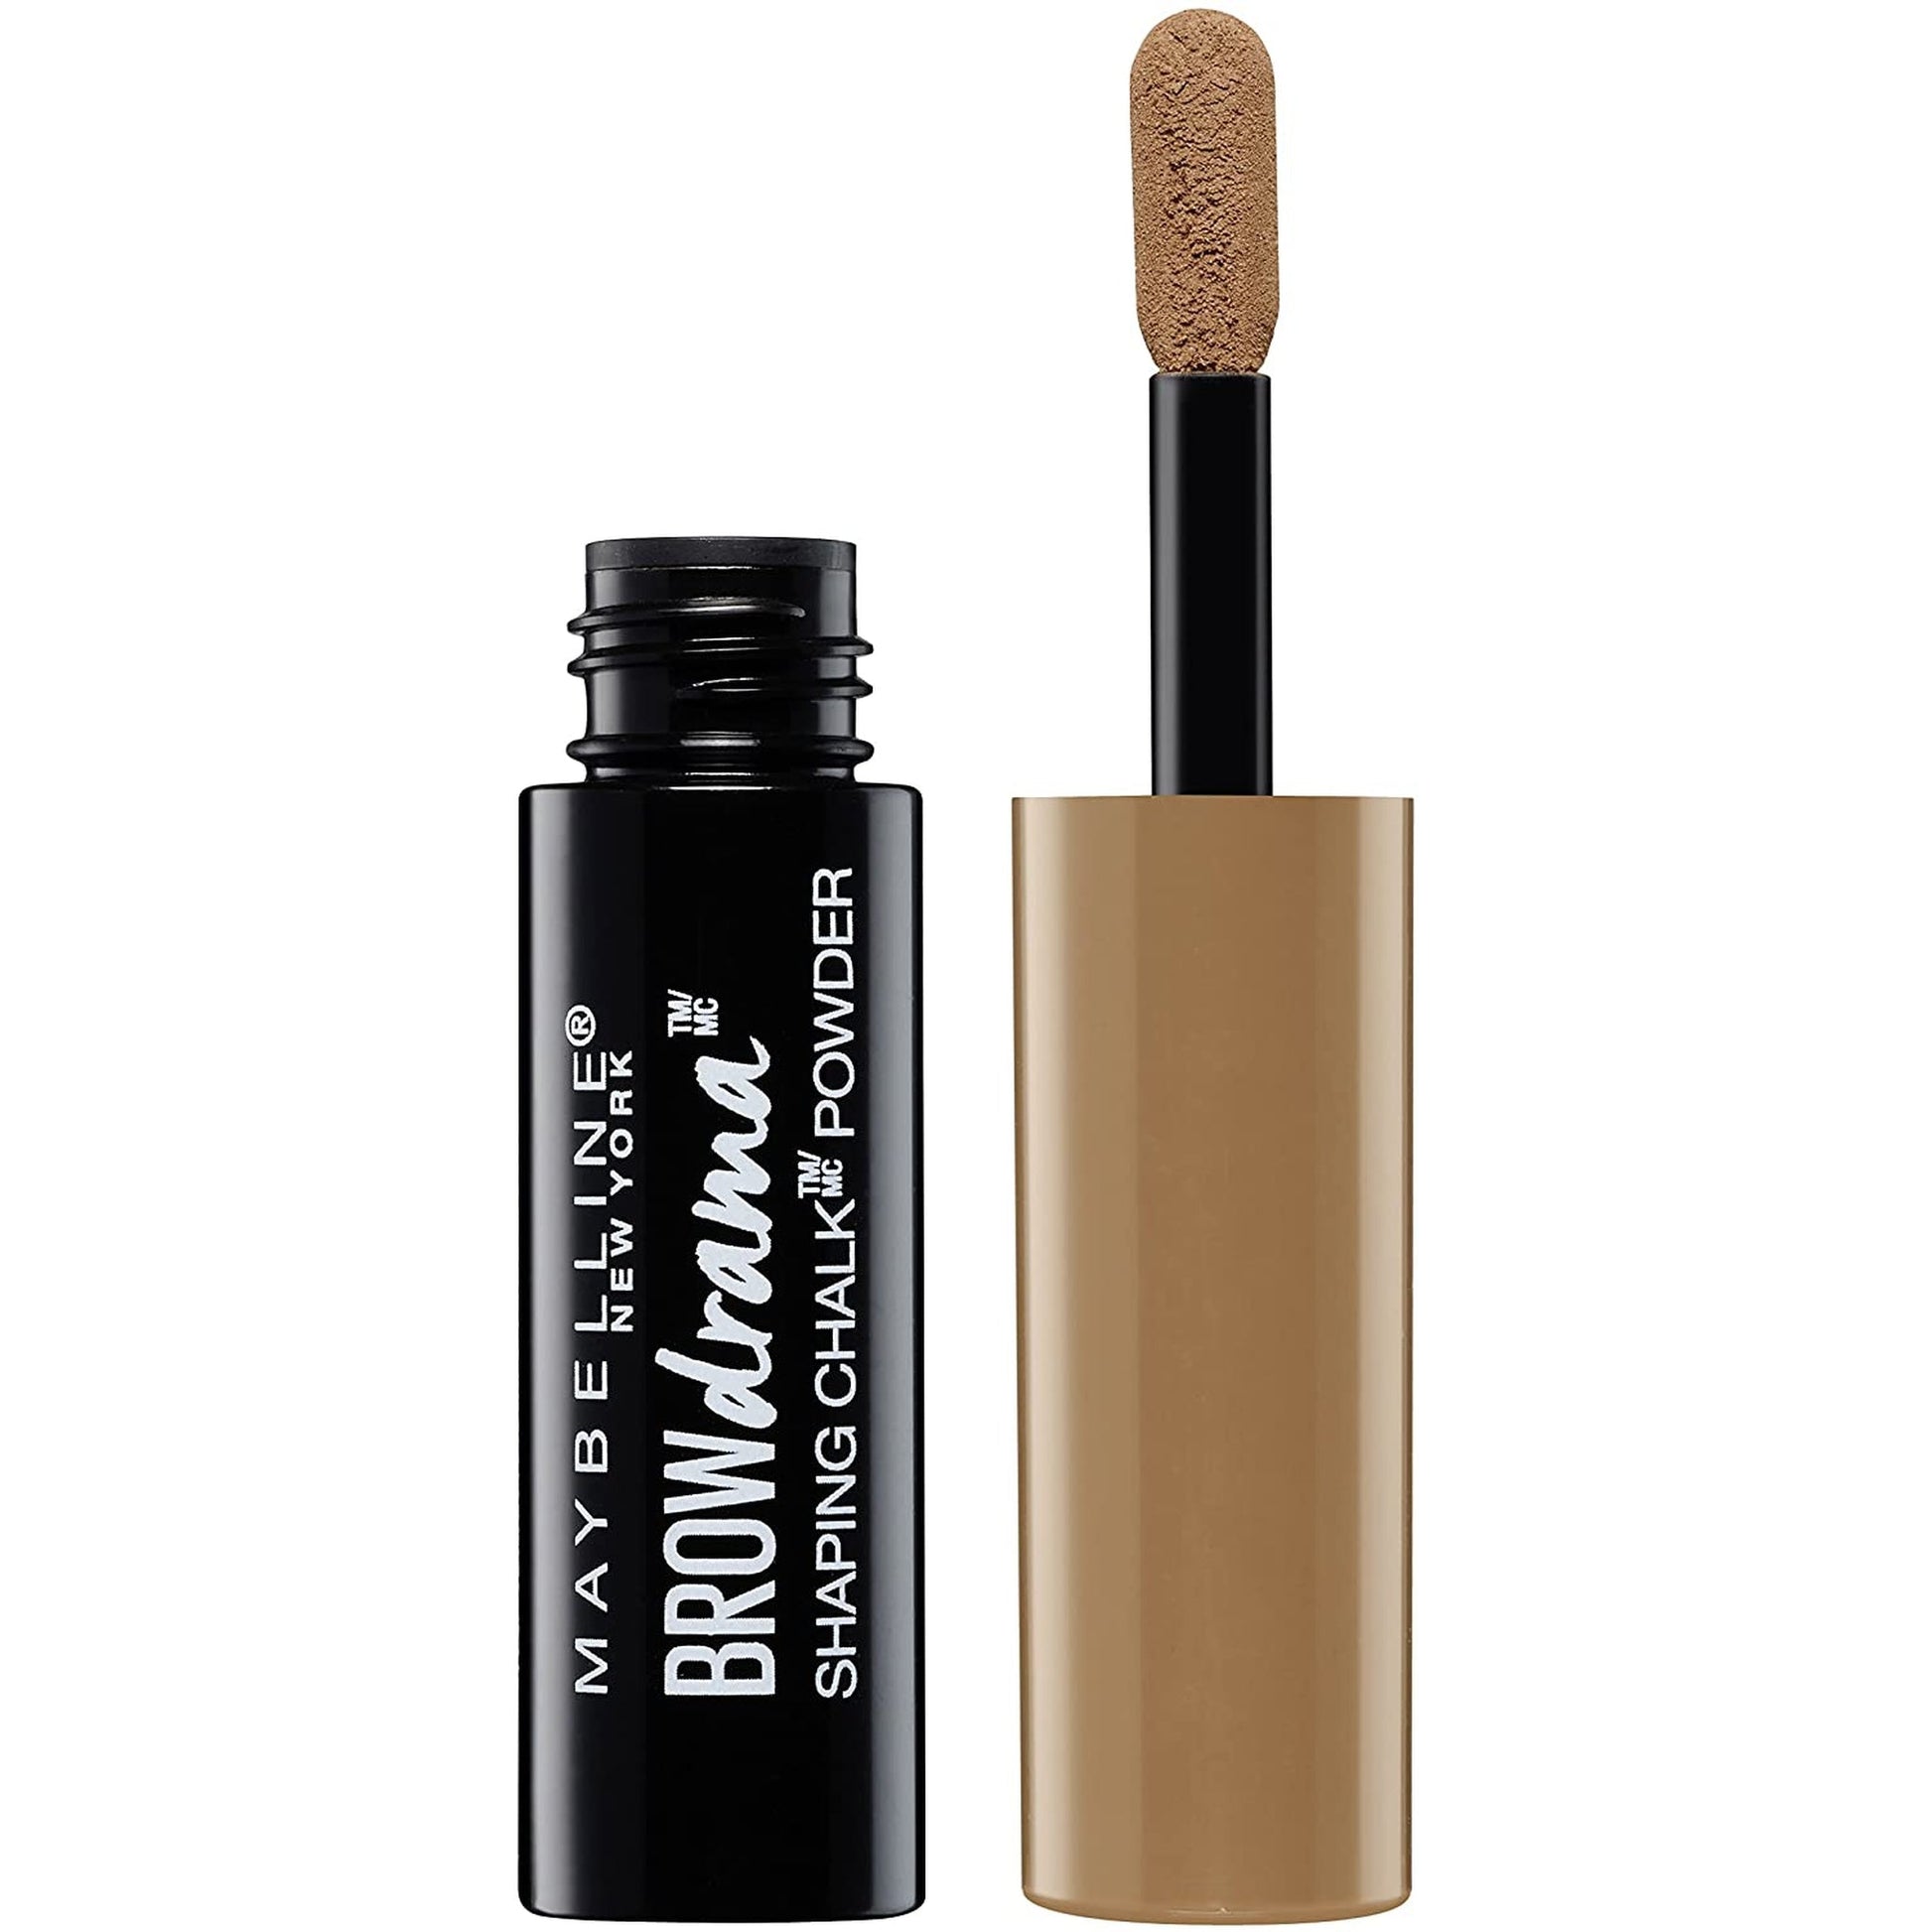 Maybelline Brow Drama Shaping Chalk Powder 100 Blonde-Maybelline-BeautyNmakeup.co.uk